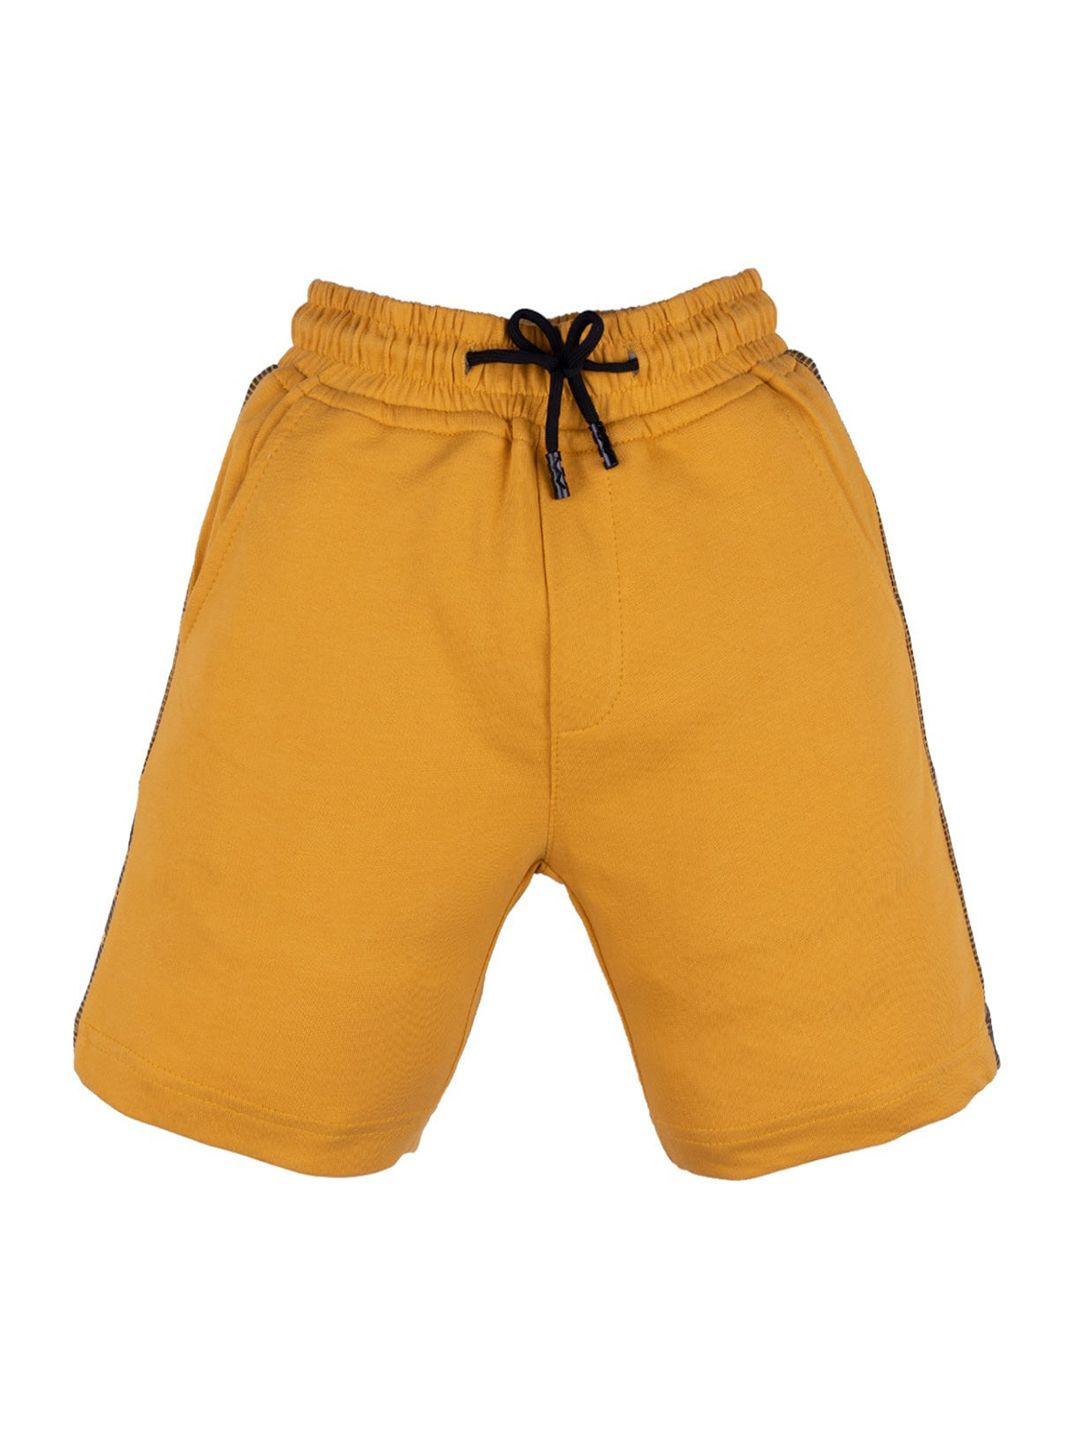 status-quo-boys-gold-toned-high-rise-shorts